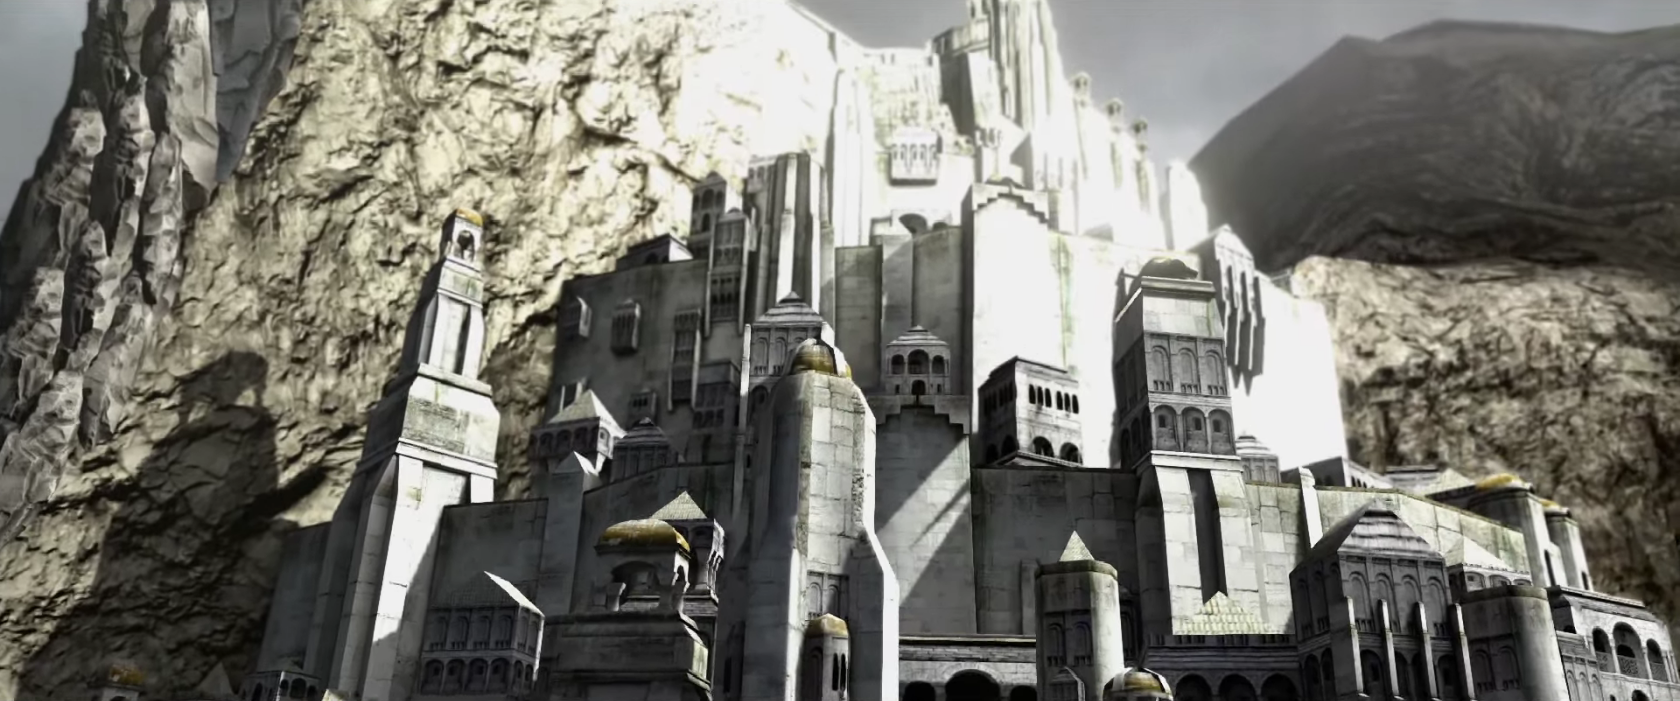 Stunning LEGO Minas Tirith stands watch over Gondor - The Brothers